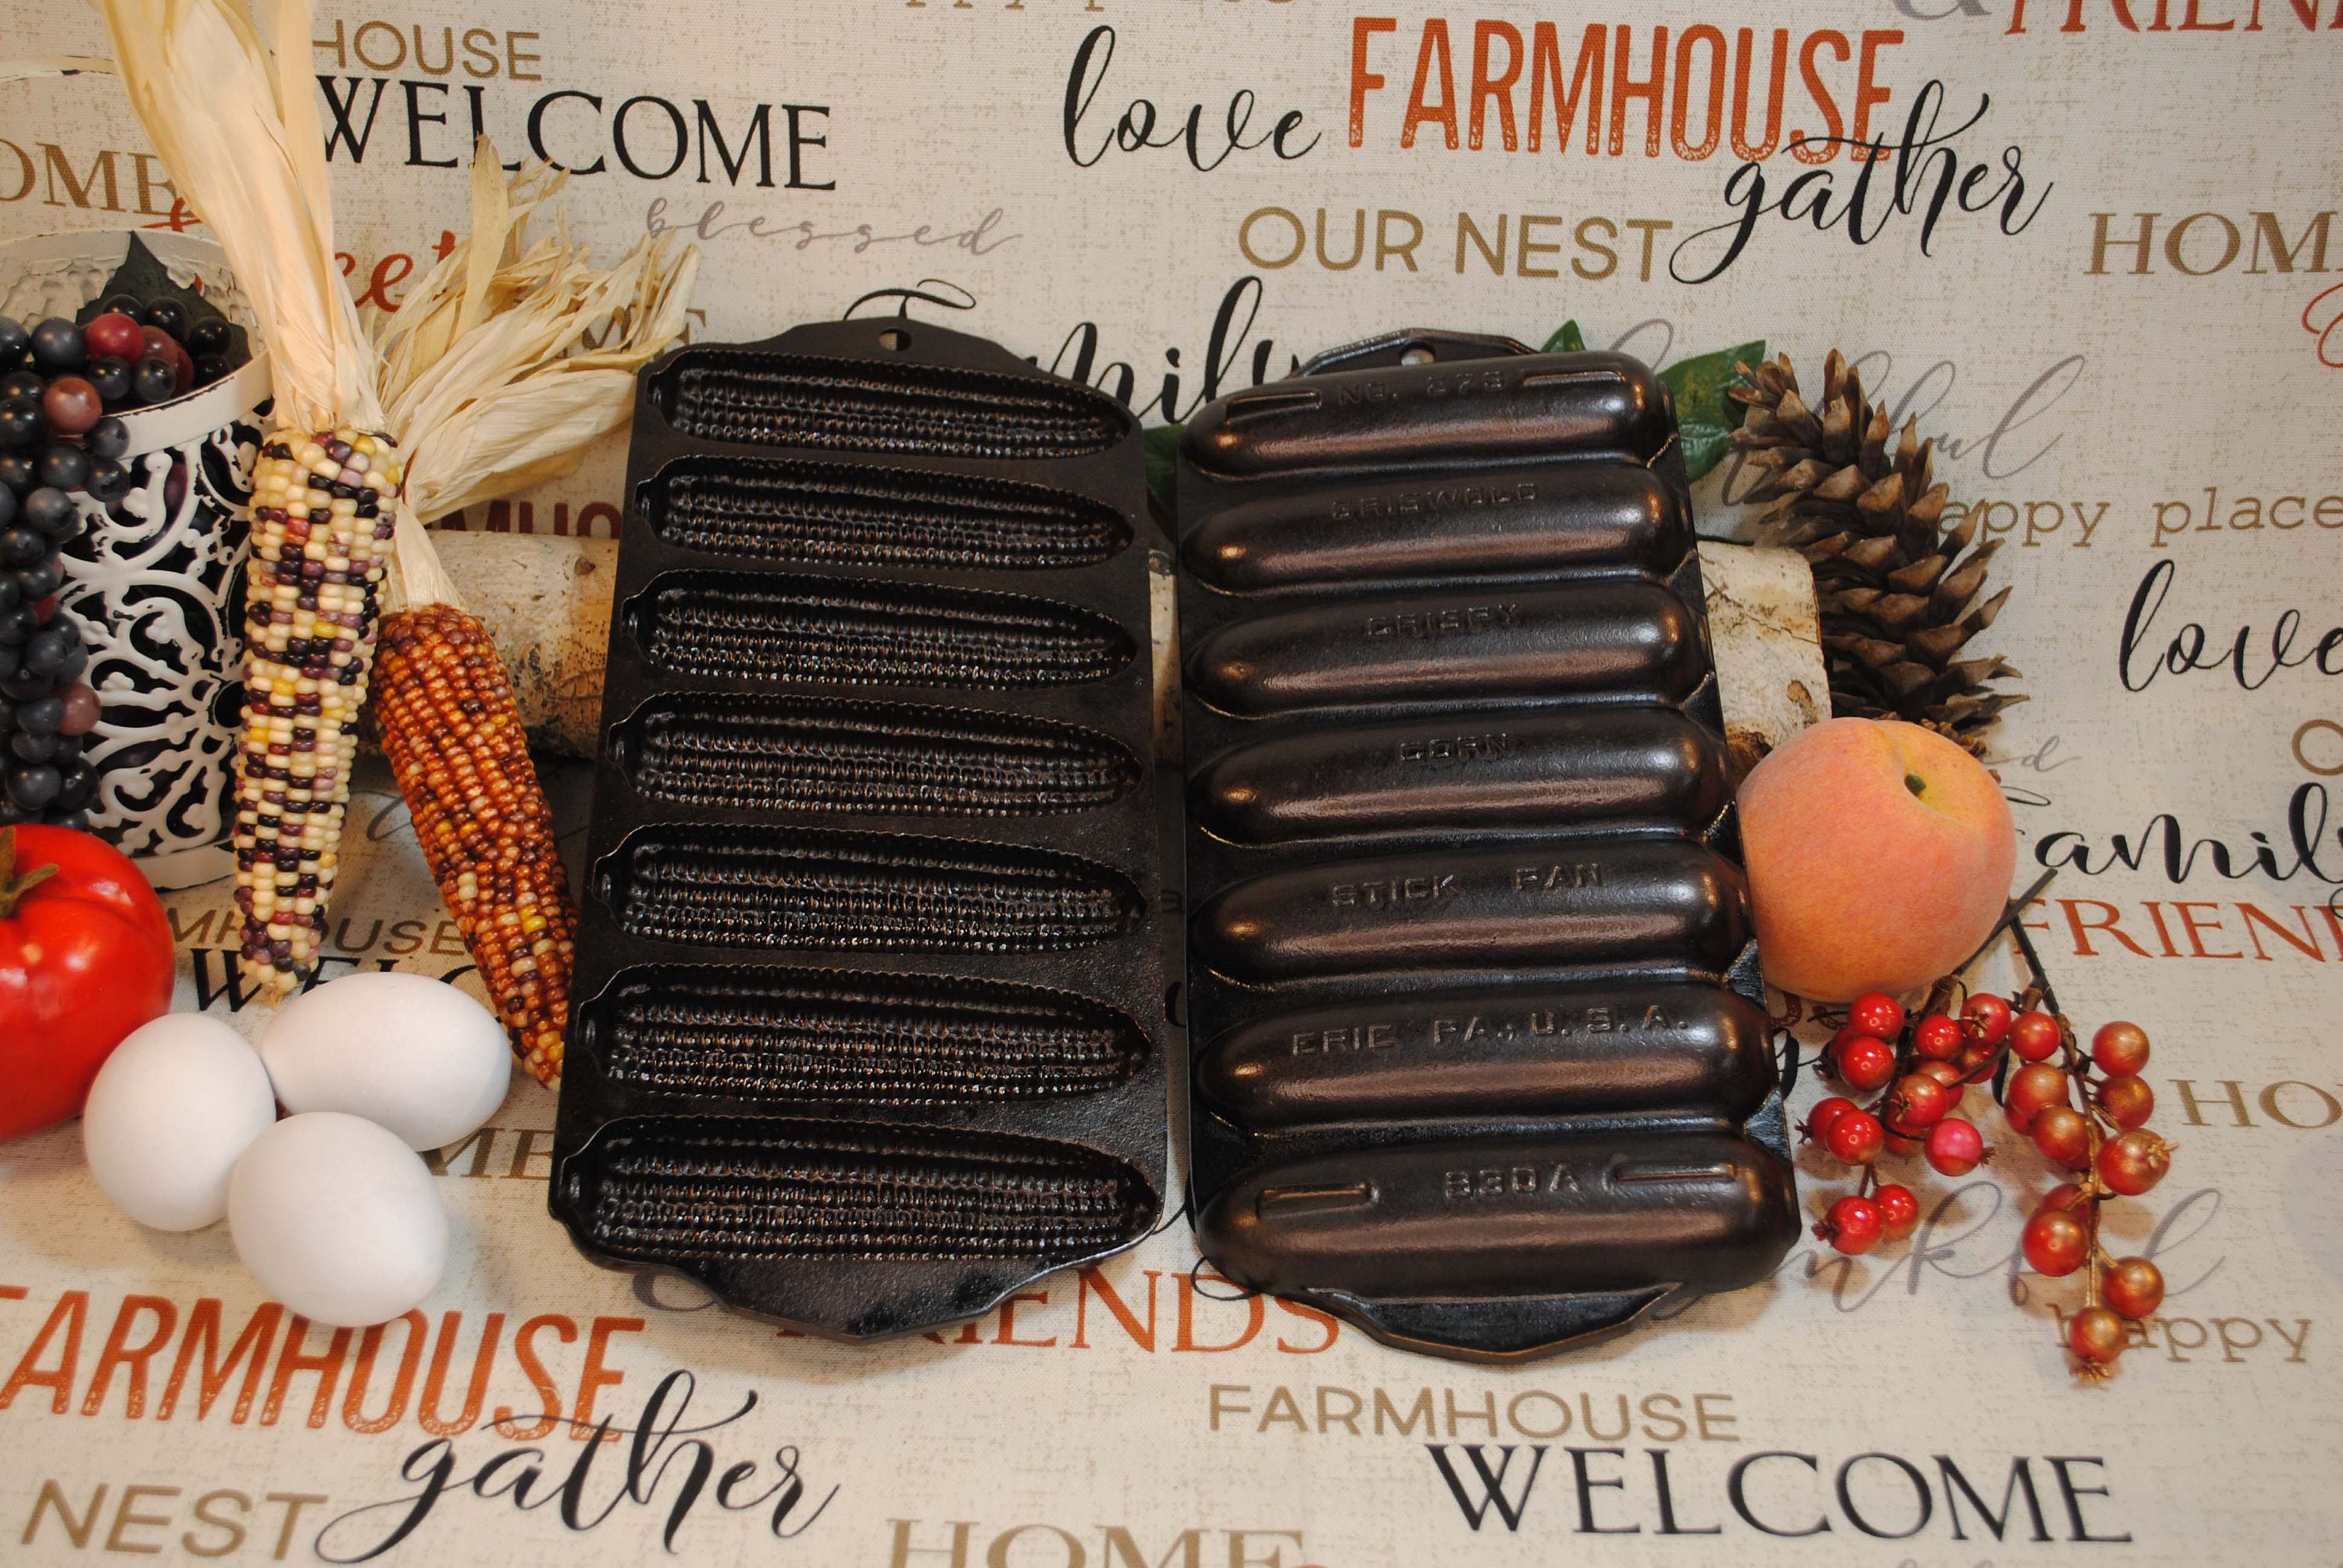 Griswold Crispy Corn Stick Pan 273 – The Forge at Pleasant Valley Farm